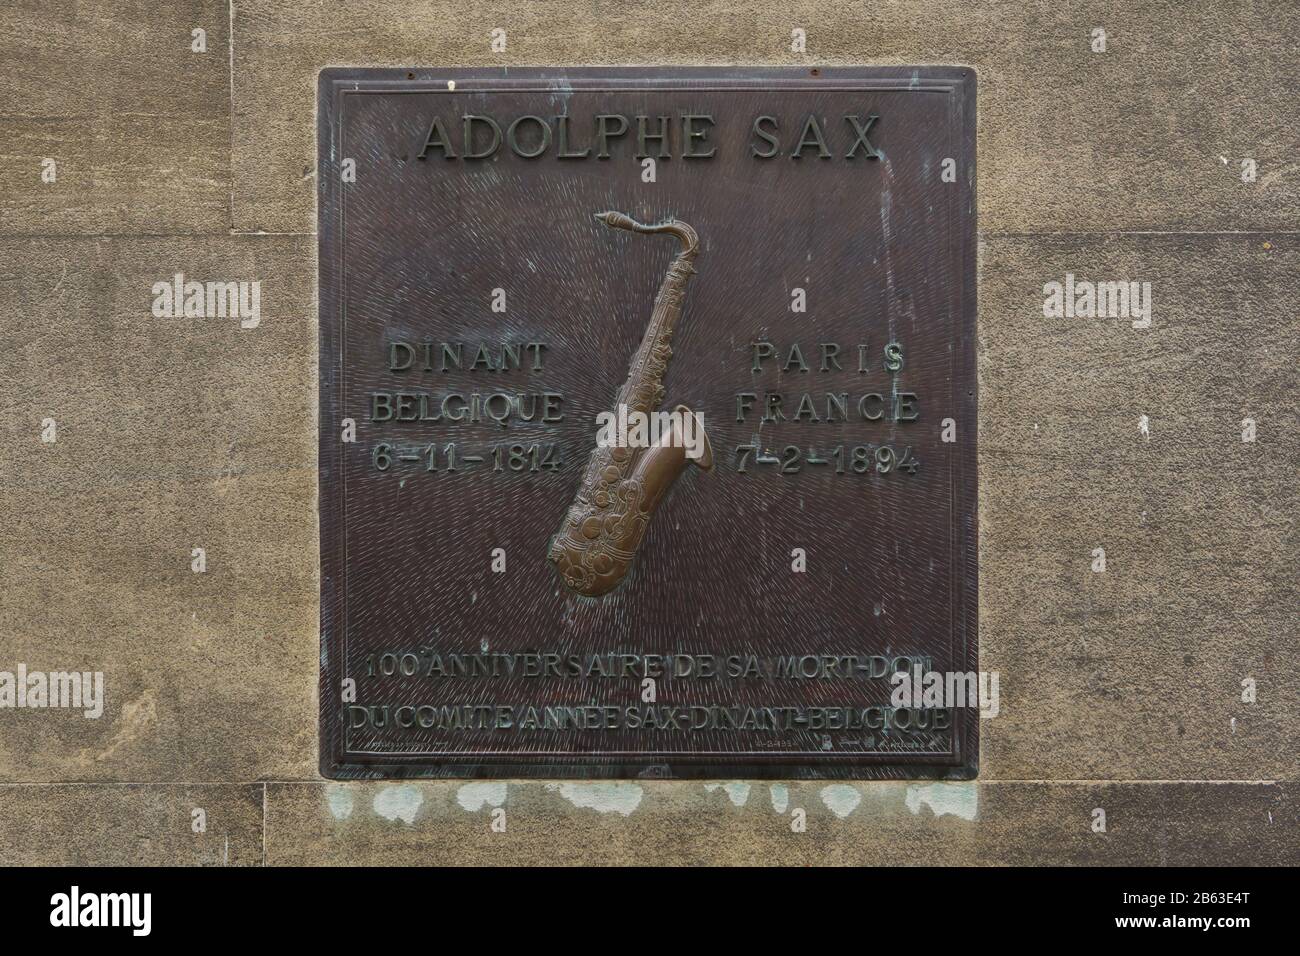 Grave of Belgian inventor and musician Adolphe Sax (1814-1894) at Montmartre Cemetery (Cimetière de Montmartre) in Paris, France. Adolphe Sax created the saxophone in the early 1840s and patenting it in 1846. Stock Photo